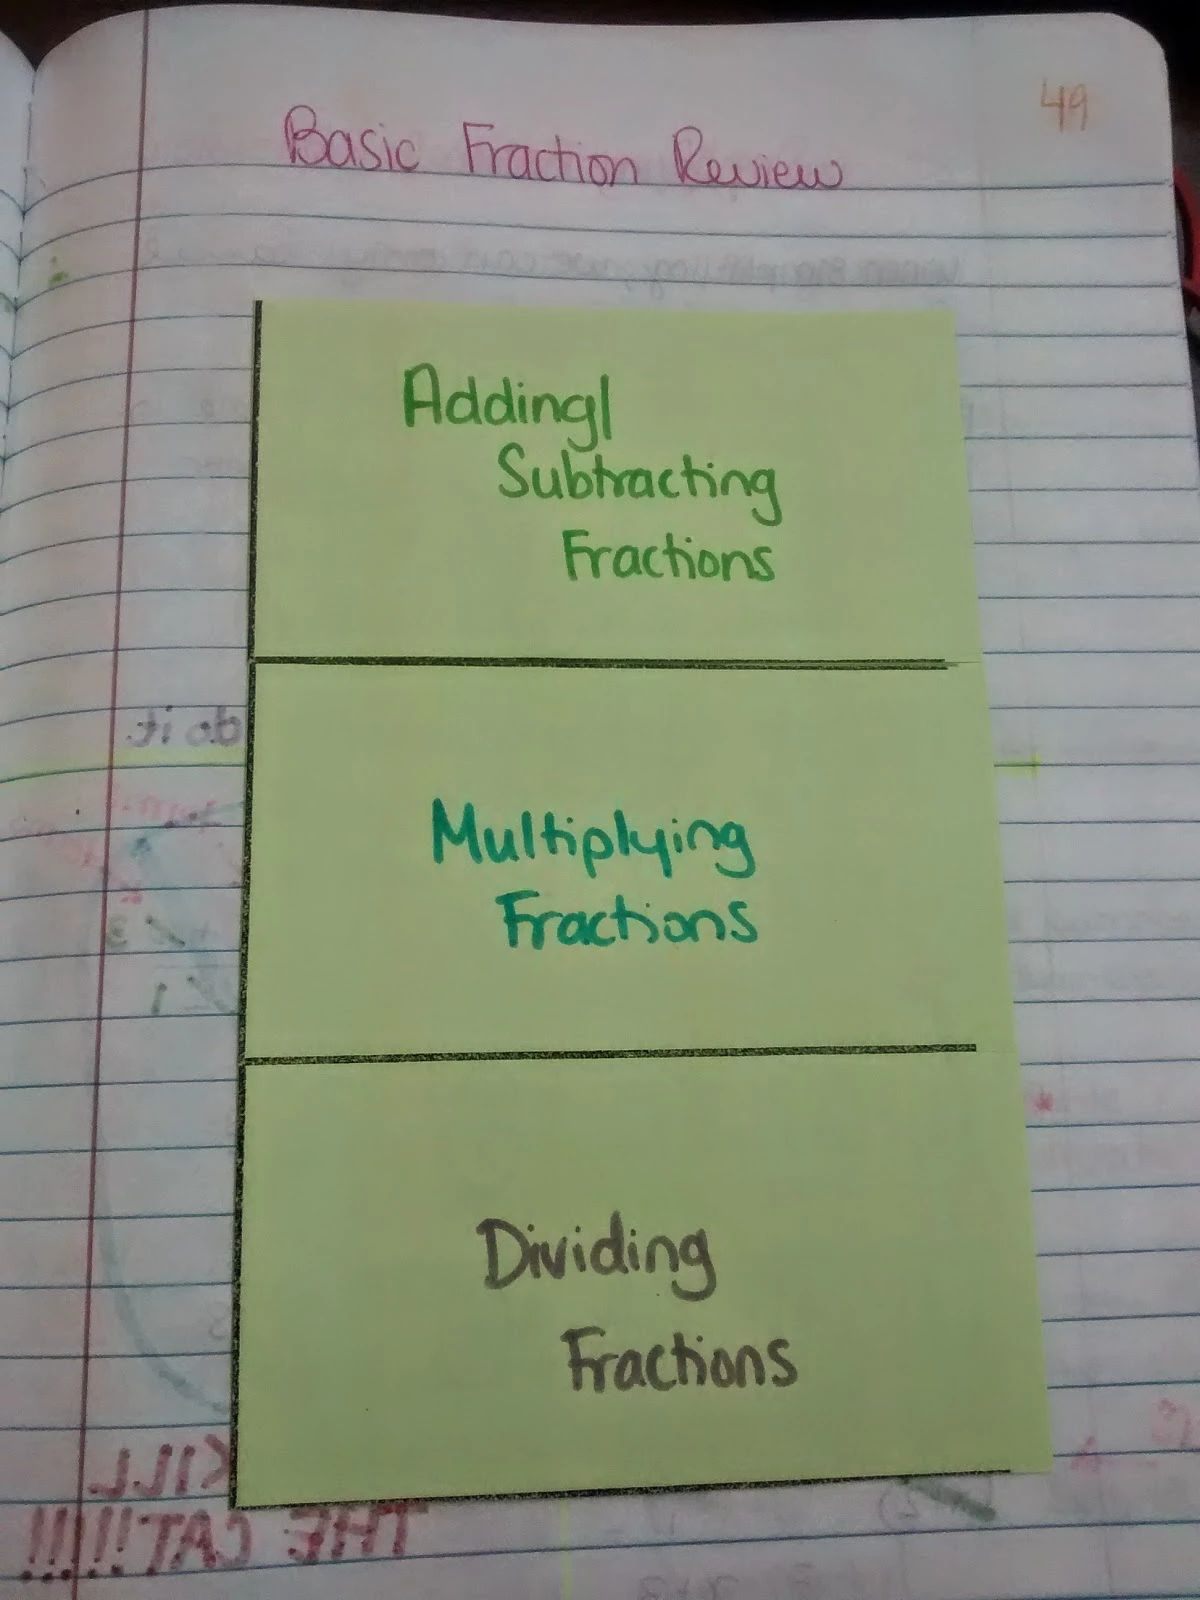 fraction review foldable in interactive notebook. 